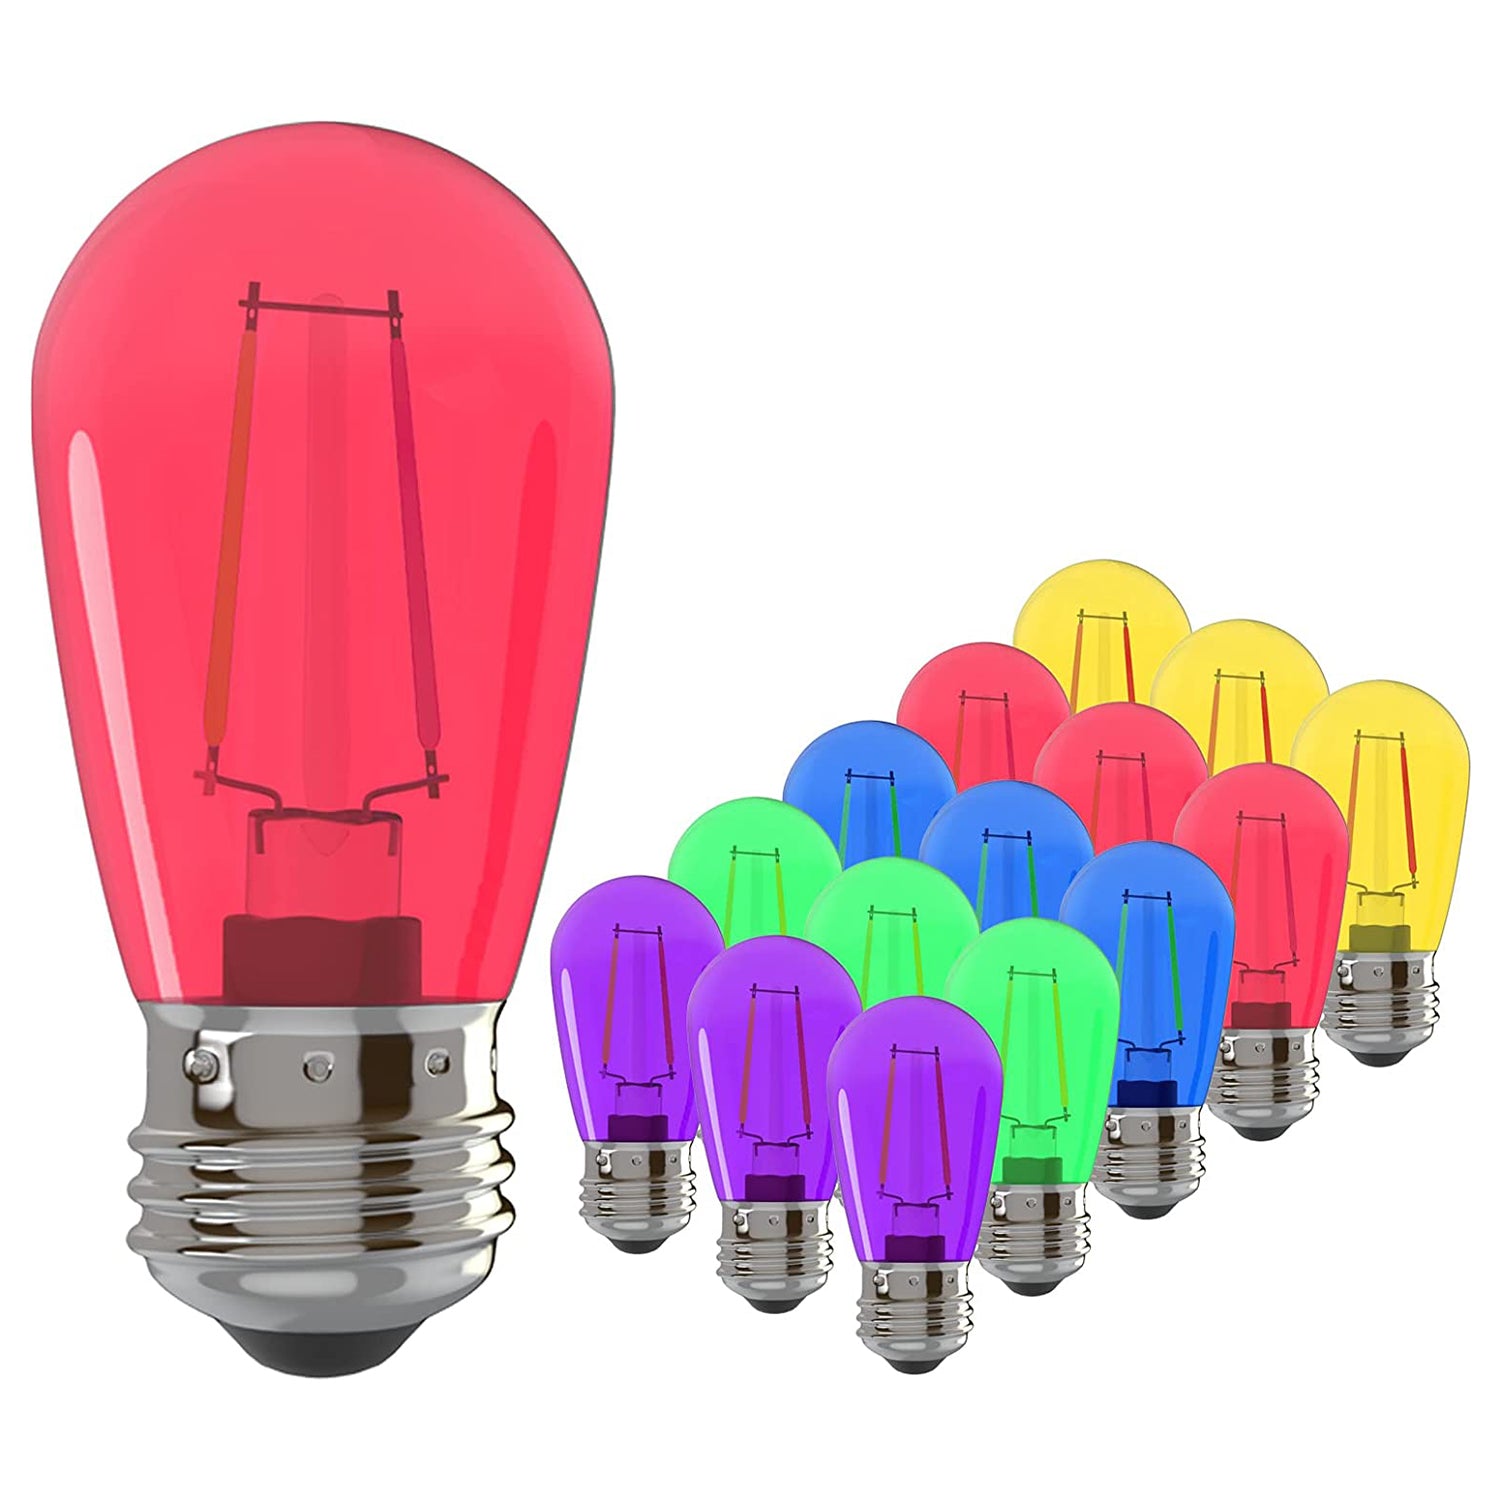 Banord Colored 2W S14 Replacement LED Bulbs, 15 Pack 2700K Dimmable RGB Bulbs Outdoor String Lights Vintage Filament LED Edison Light Bulb, Waterproof & Shatterproof E26 Screw Base Multicolor Bulbs